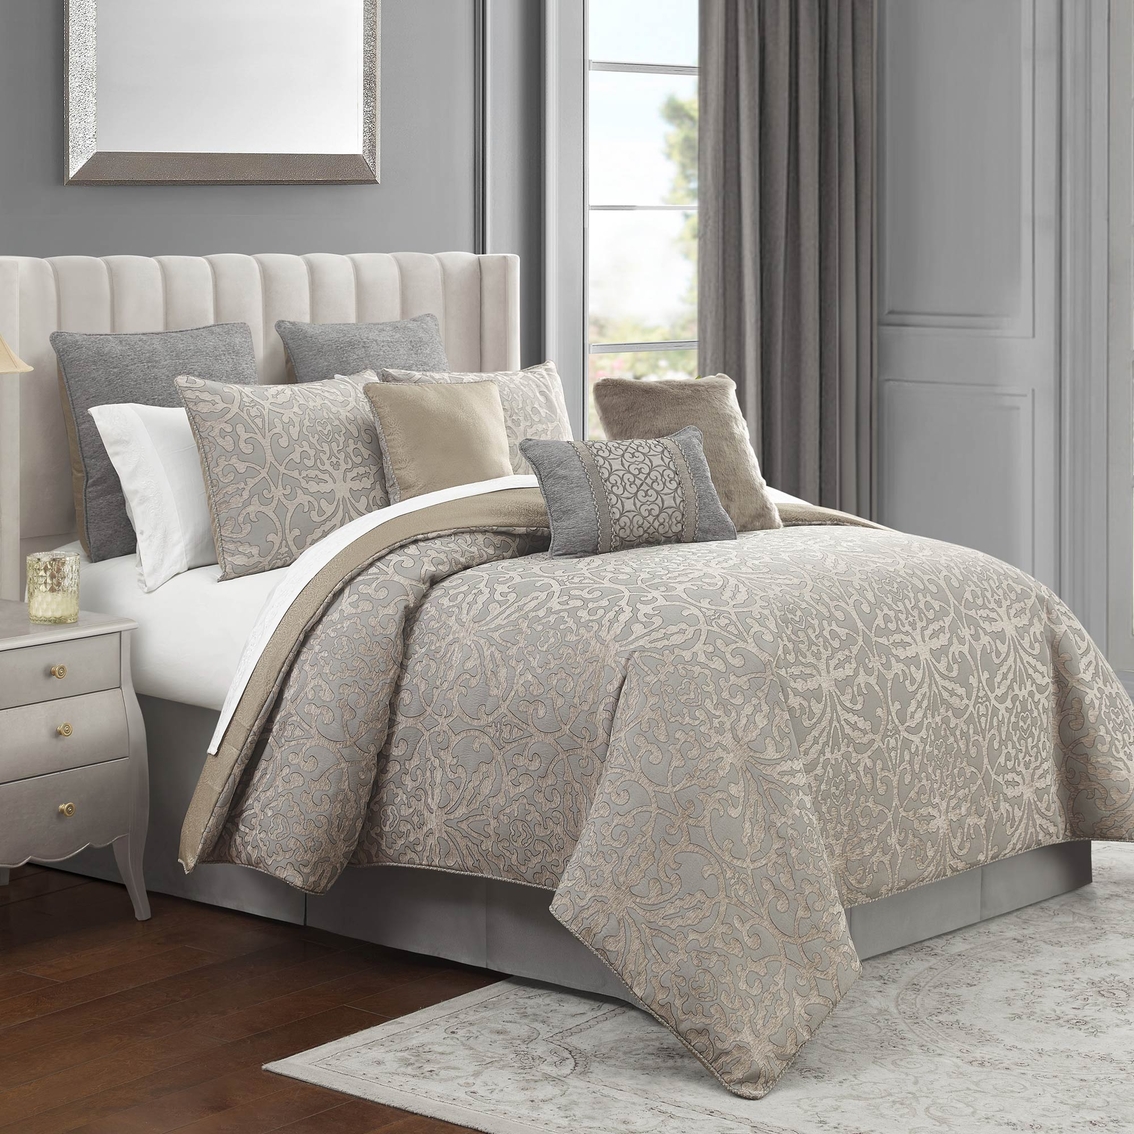 Waterford Carrick 6 pc. Comforter Set - Image 2 of 9